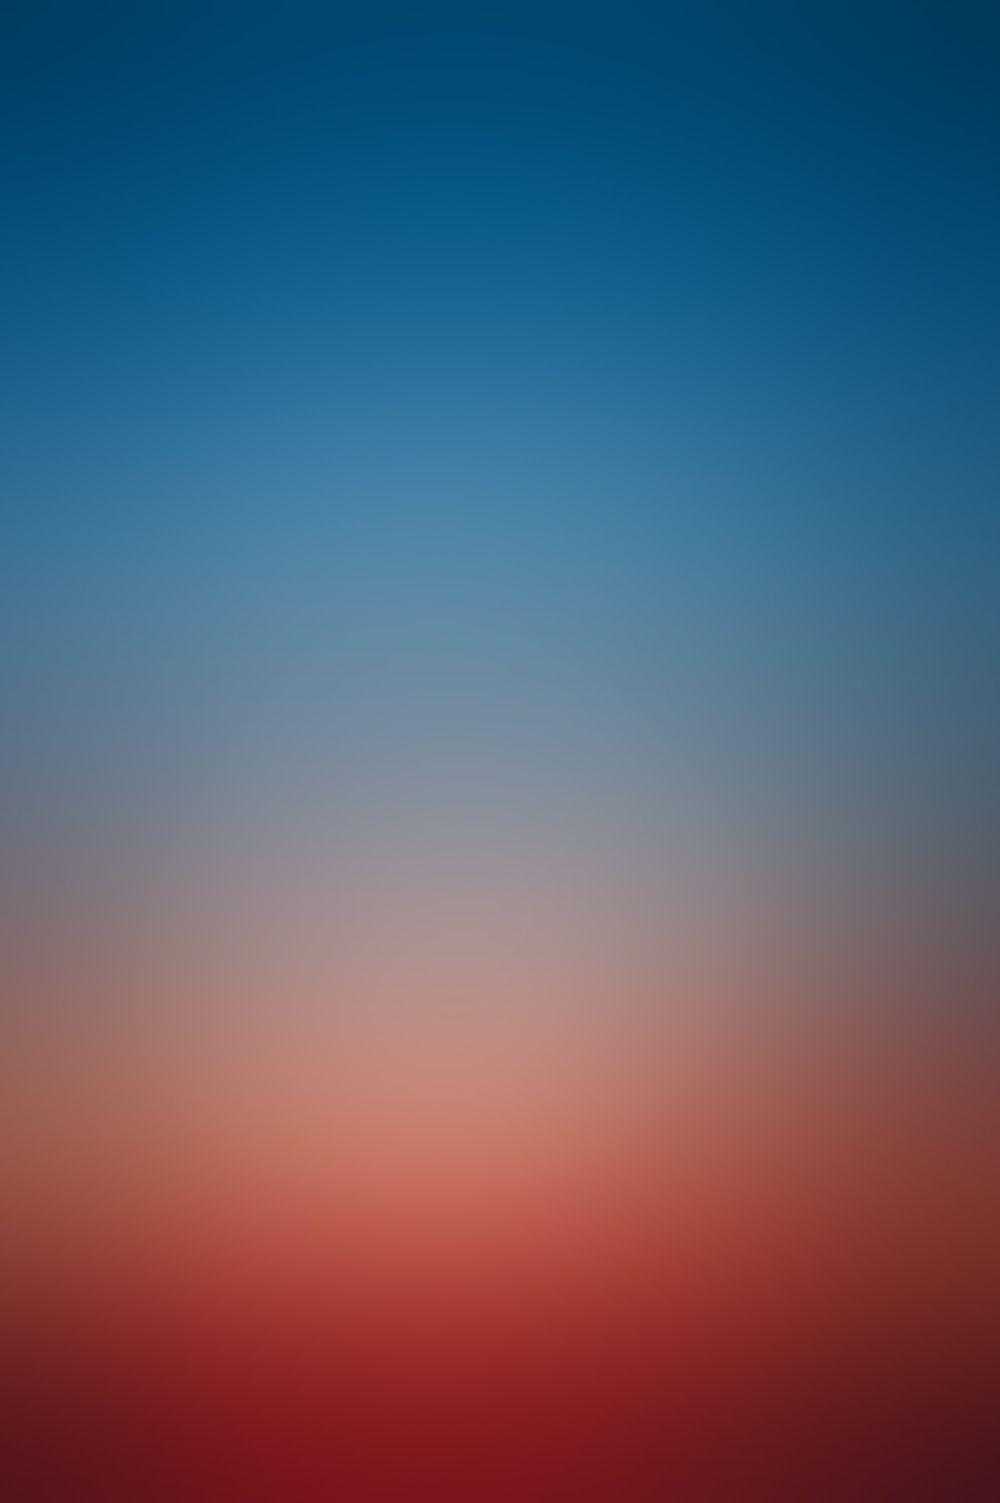 Sunset Gradient VI by Nick Gerber. Colorful. Ios wallpaper